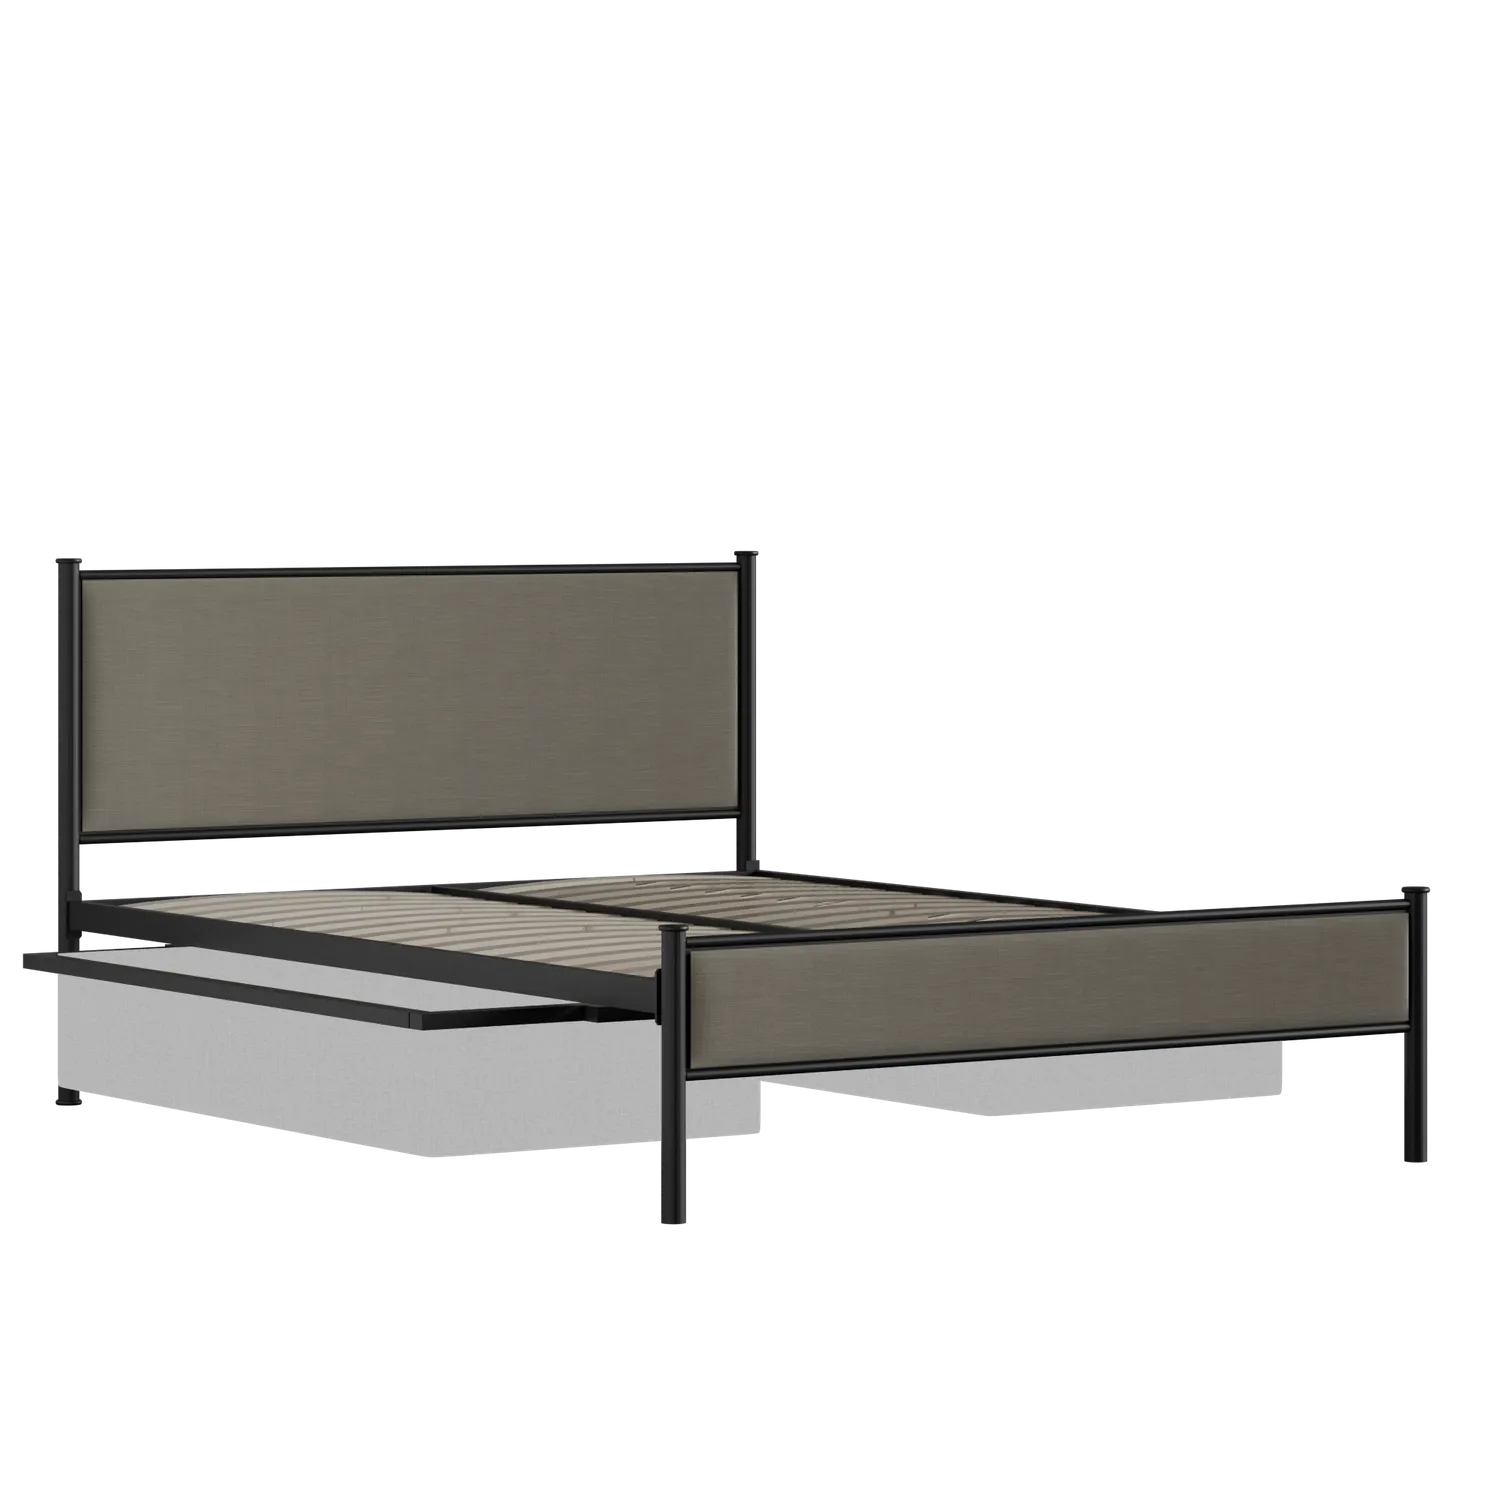 Brest iron/metal upholstered bed in black with drawers